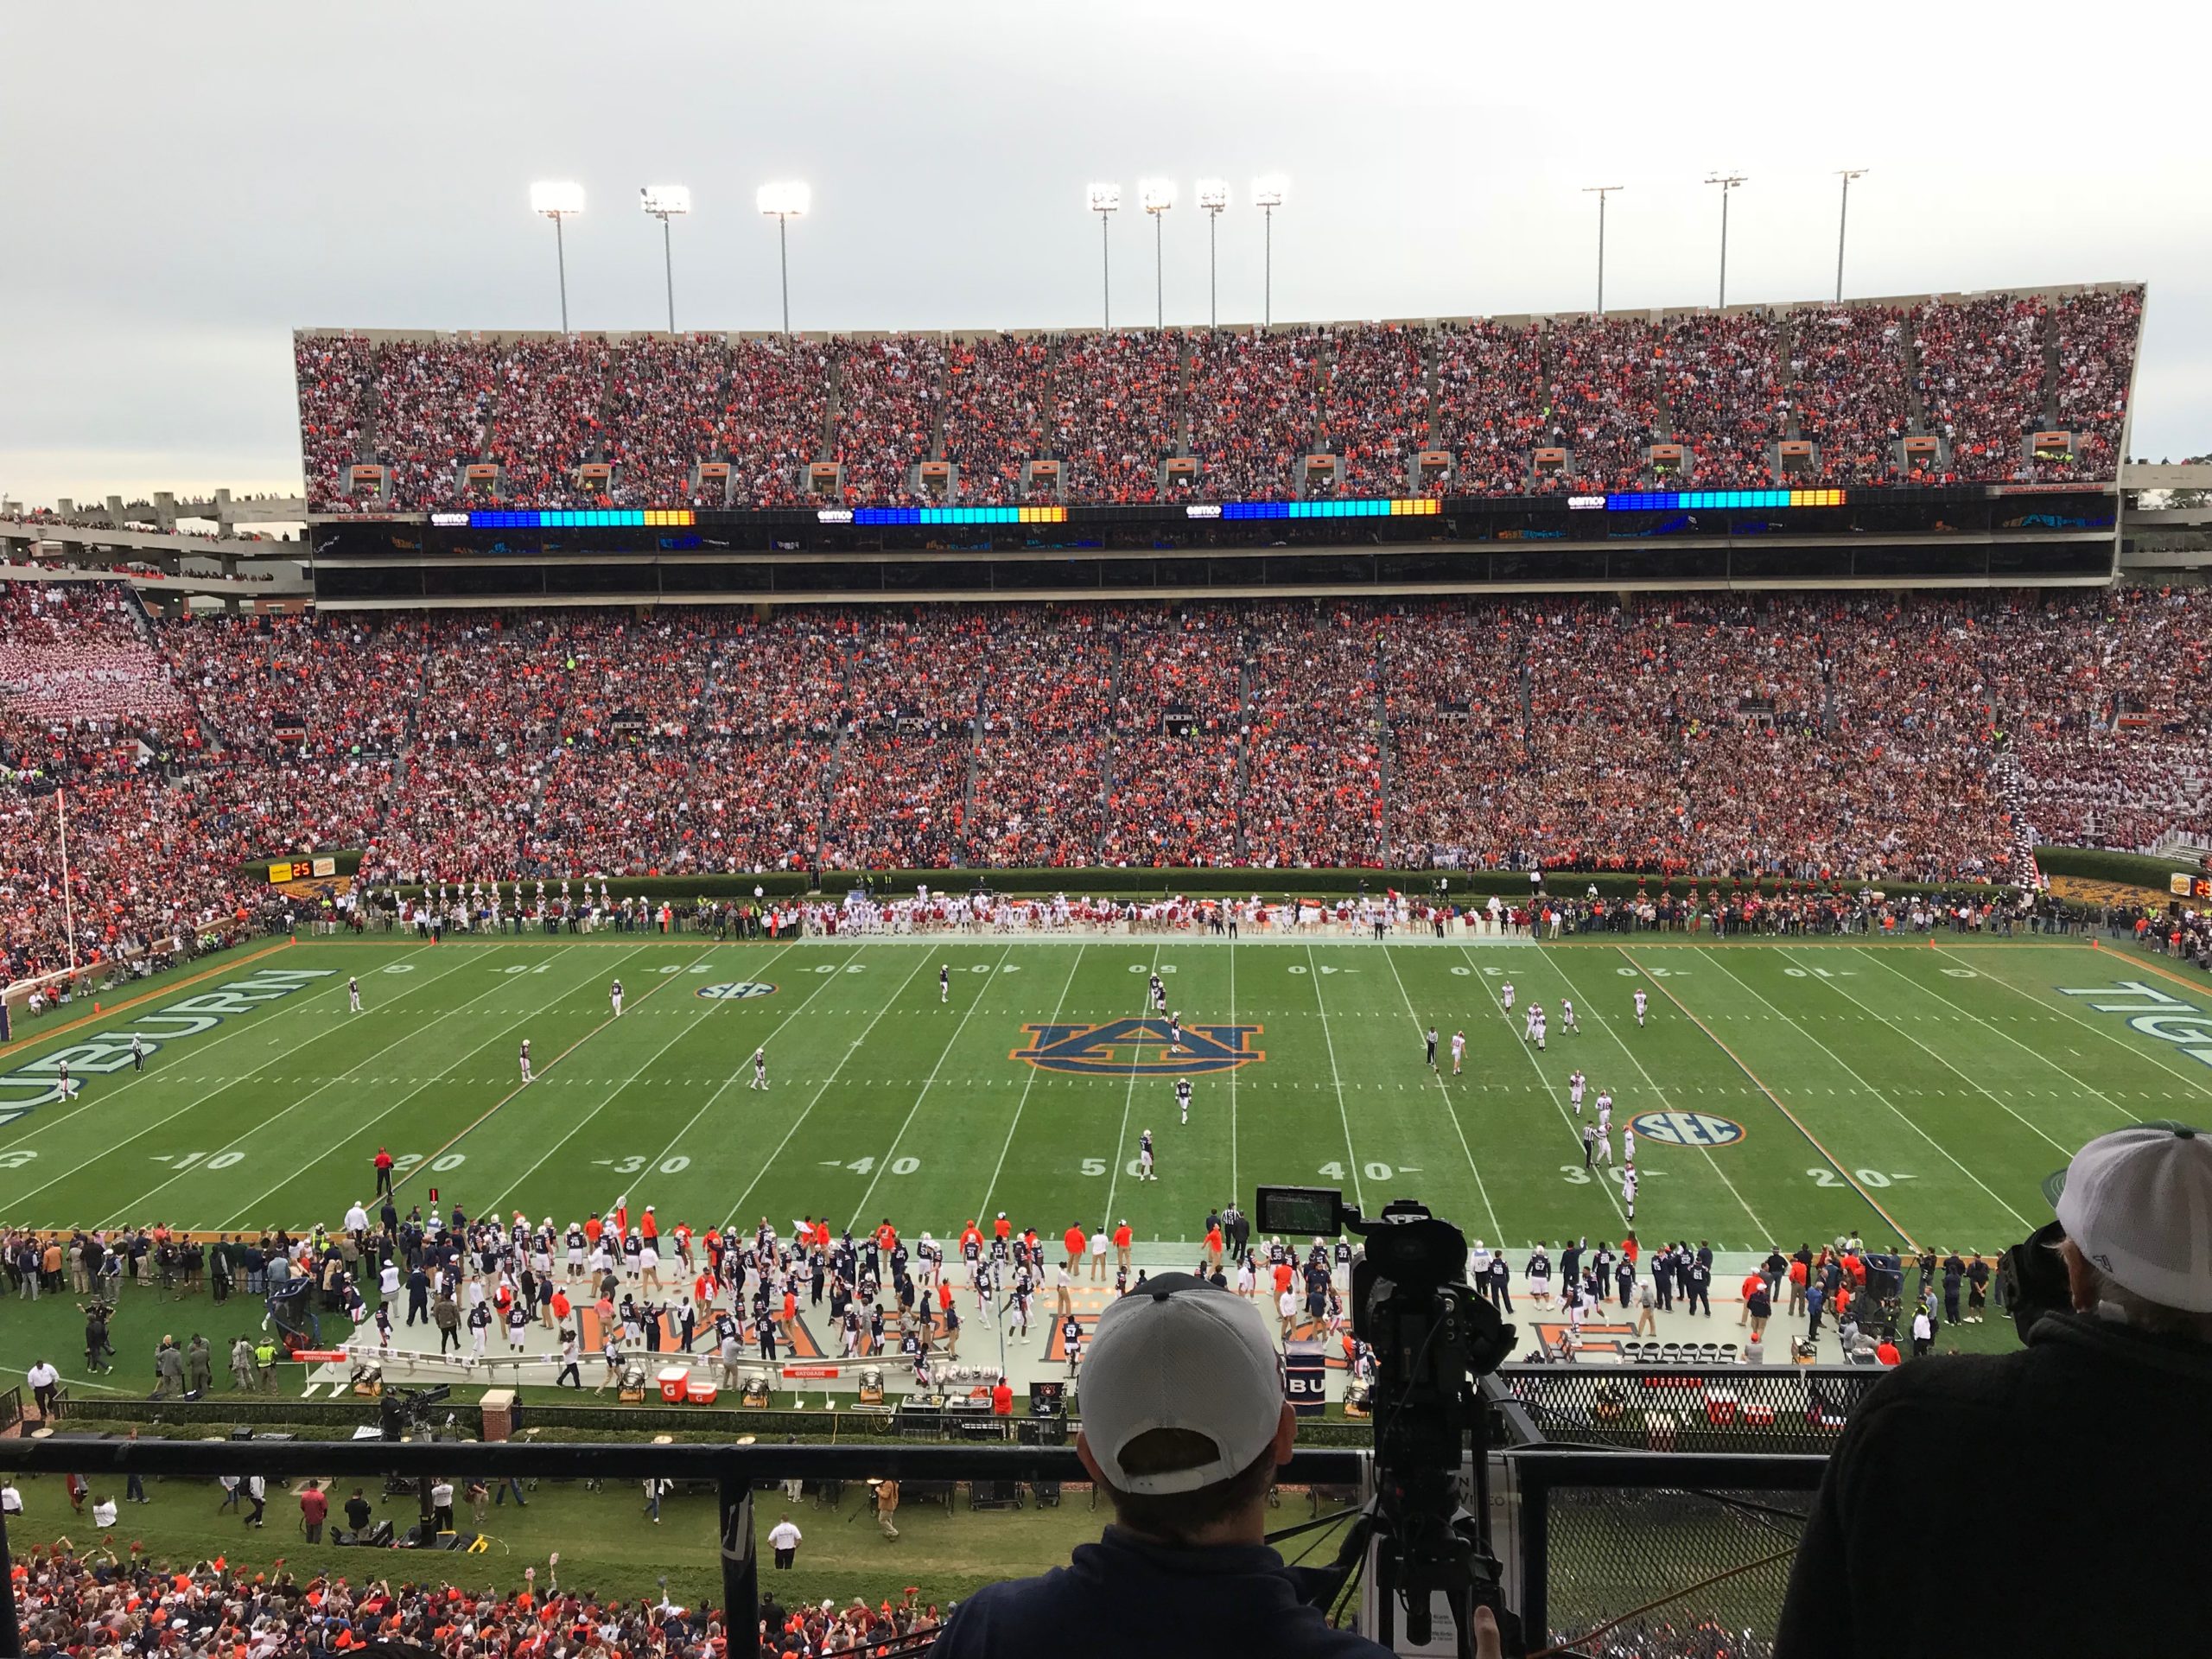 Lunce’s List (4/5/18) – Five things to know going into the Auburn spring game